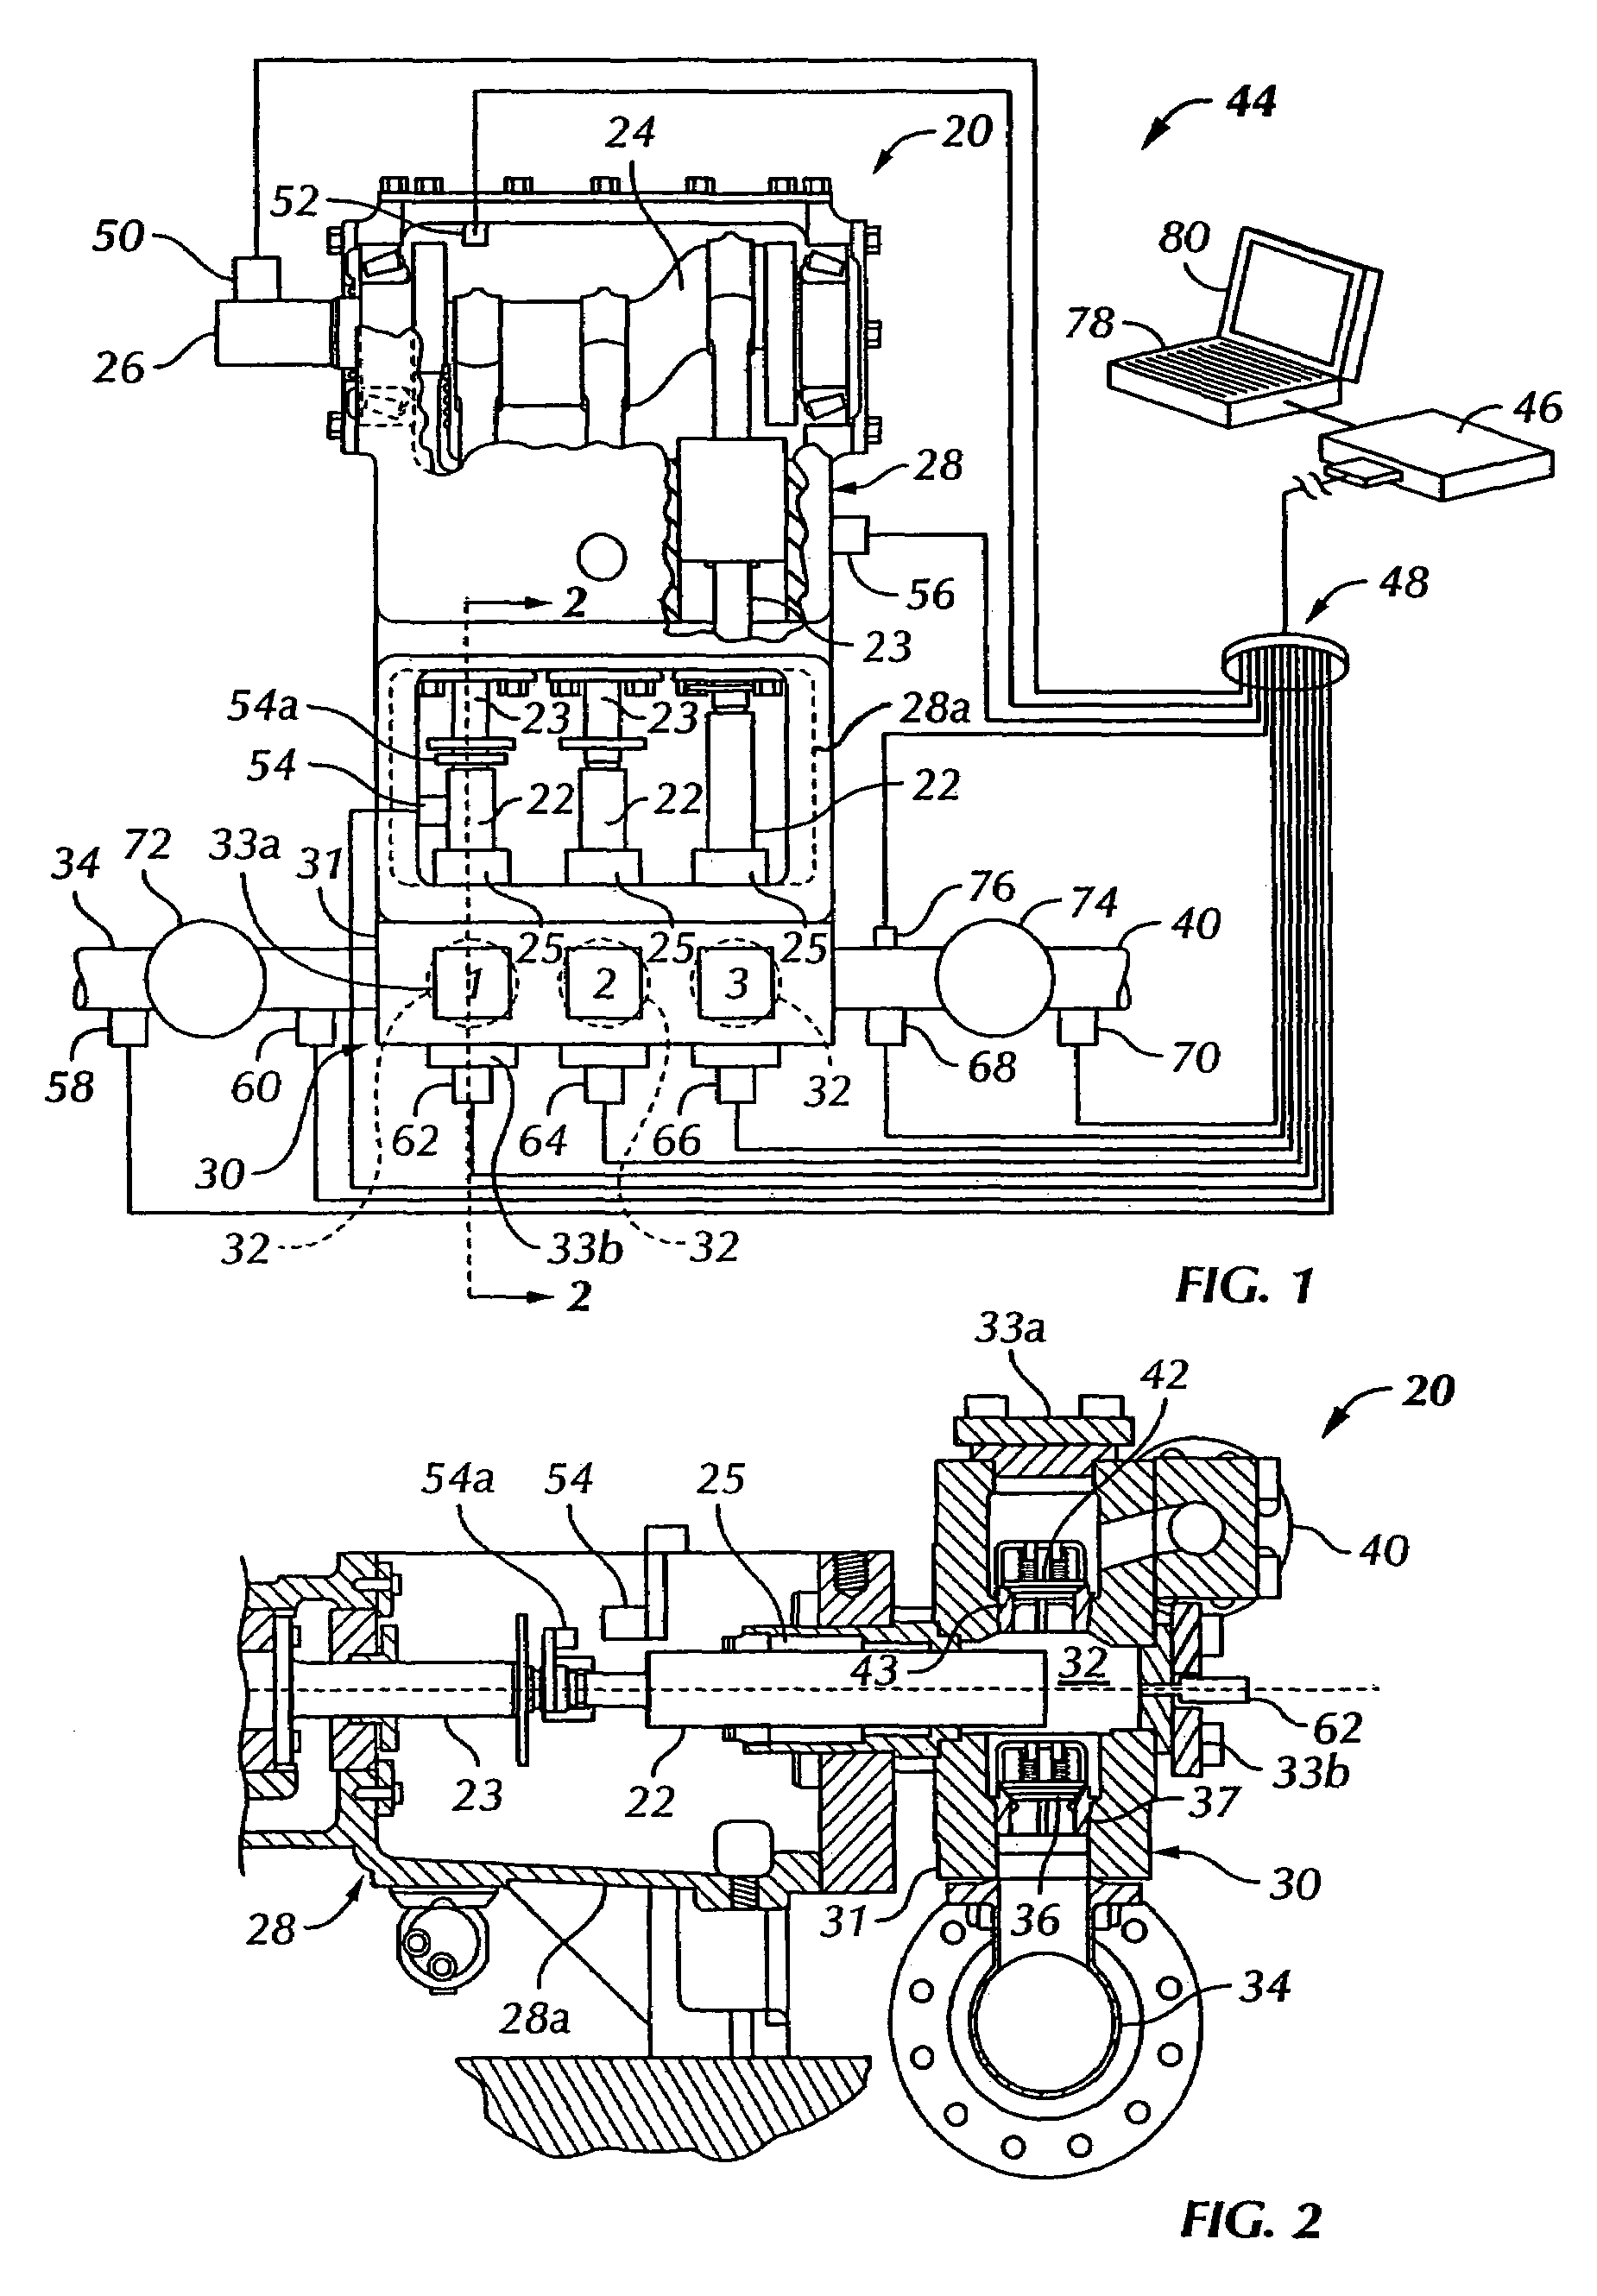 System and method for power pump performance monitoring and analysis